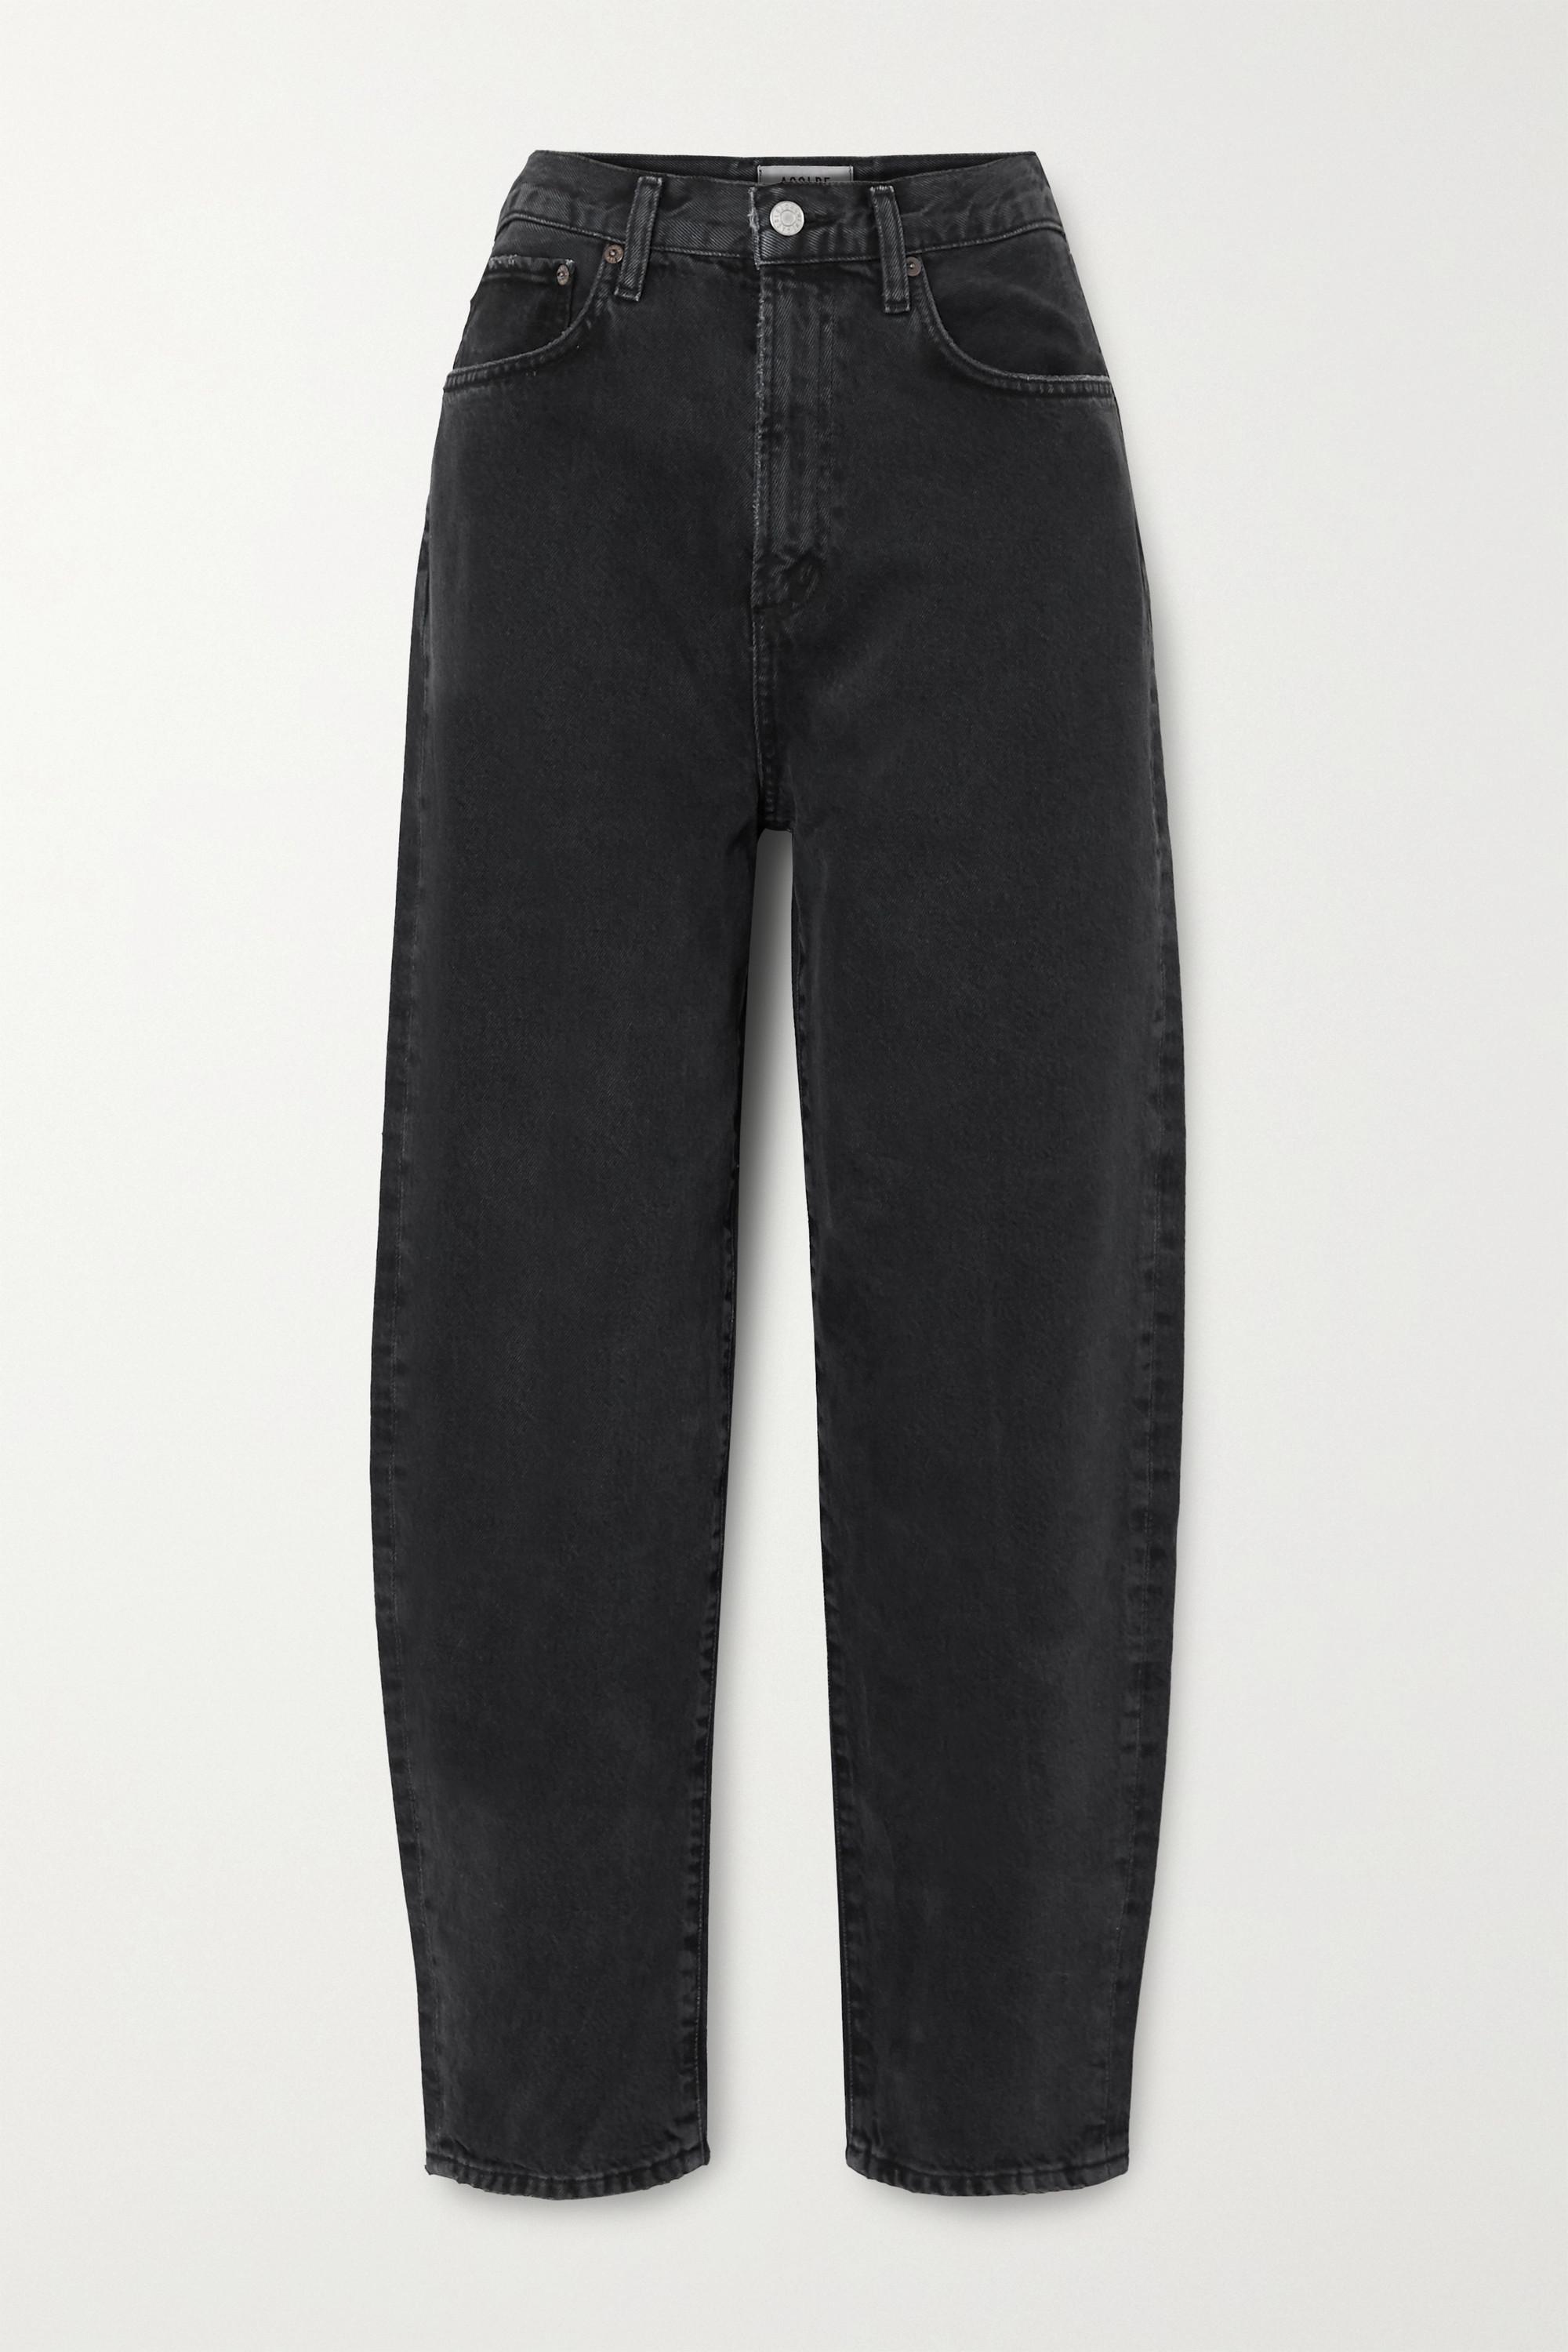 Agolde Balloon High-rise Tapered Jeans in Black | Lyst